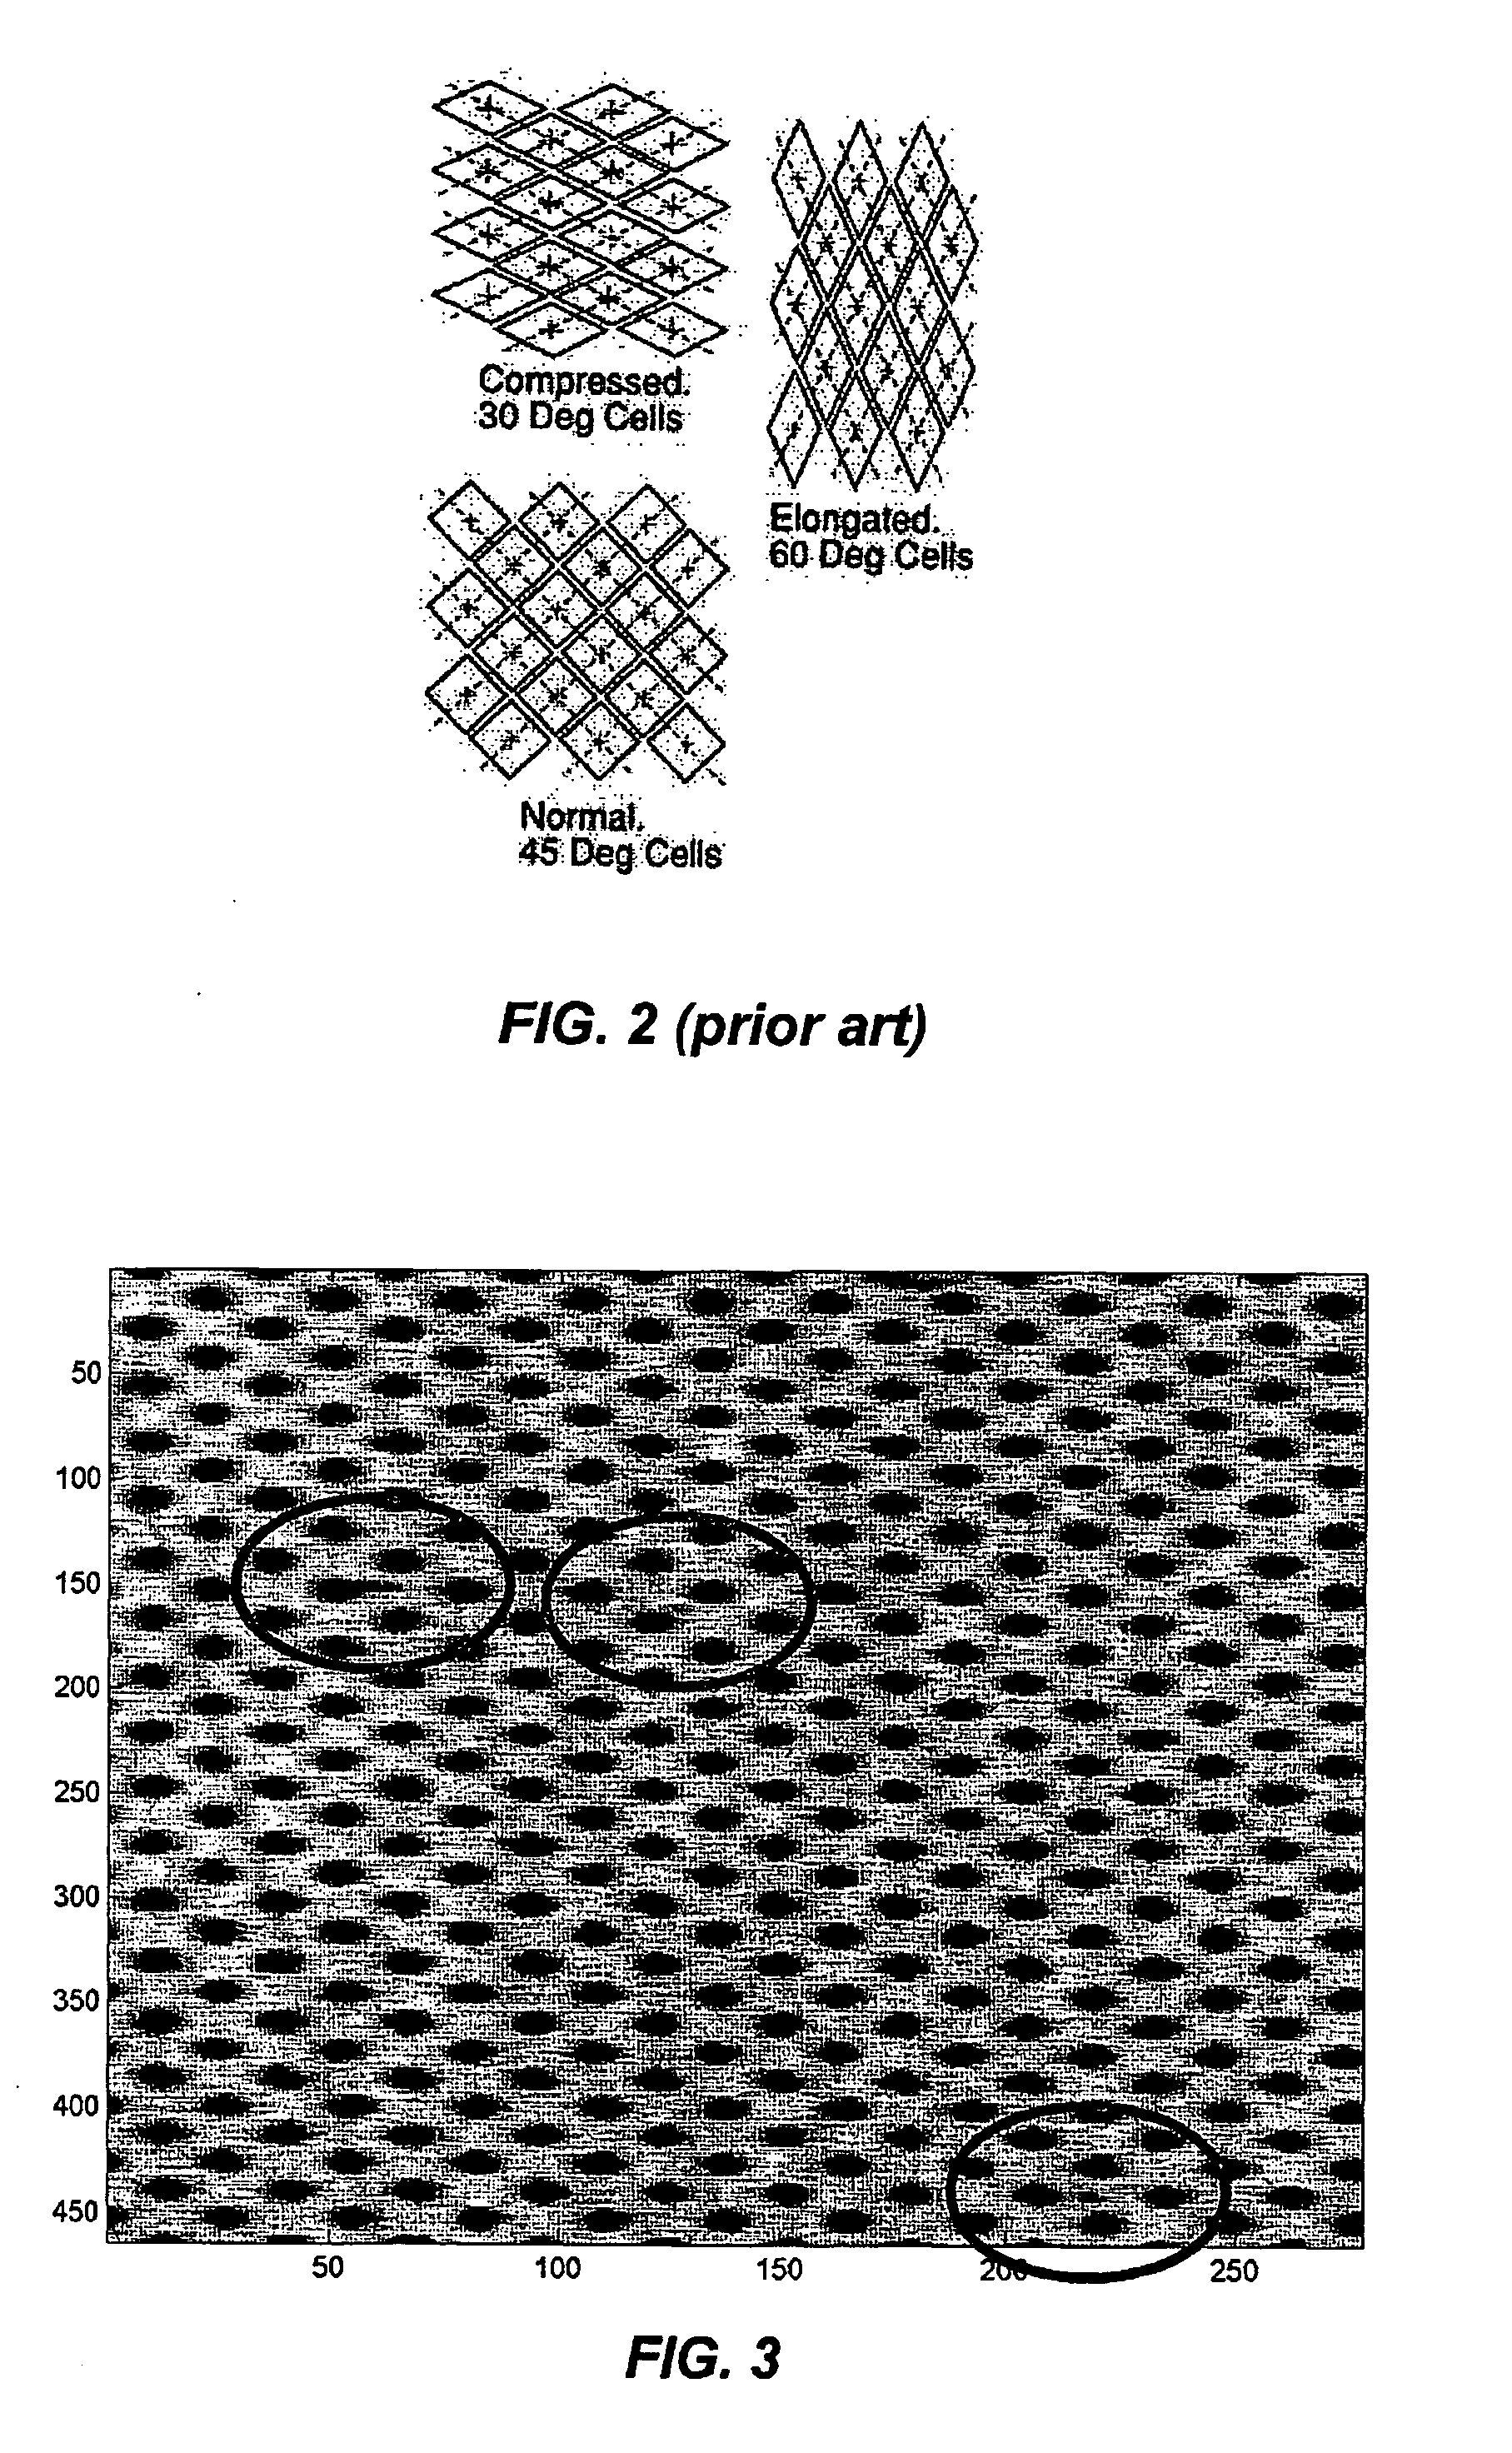 Method and system for detecting defects during the fabrication of a printing cylinder